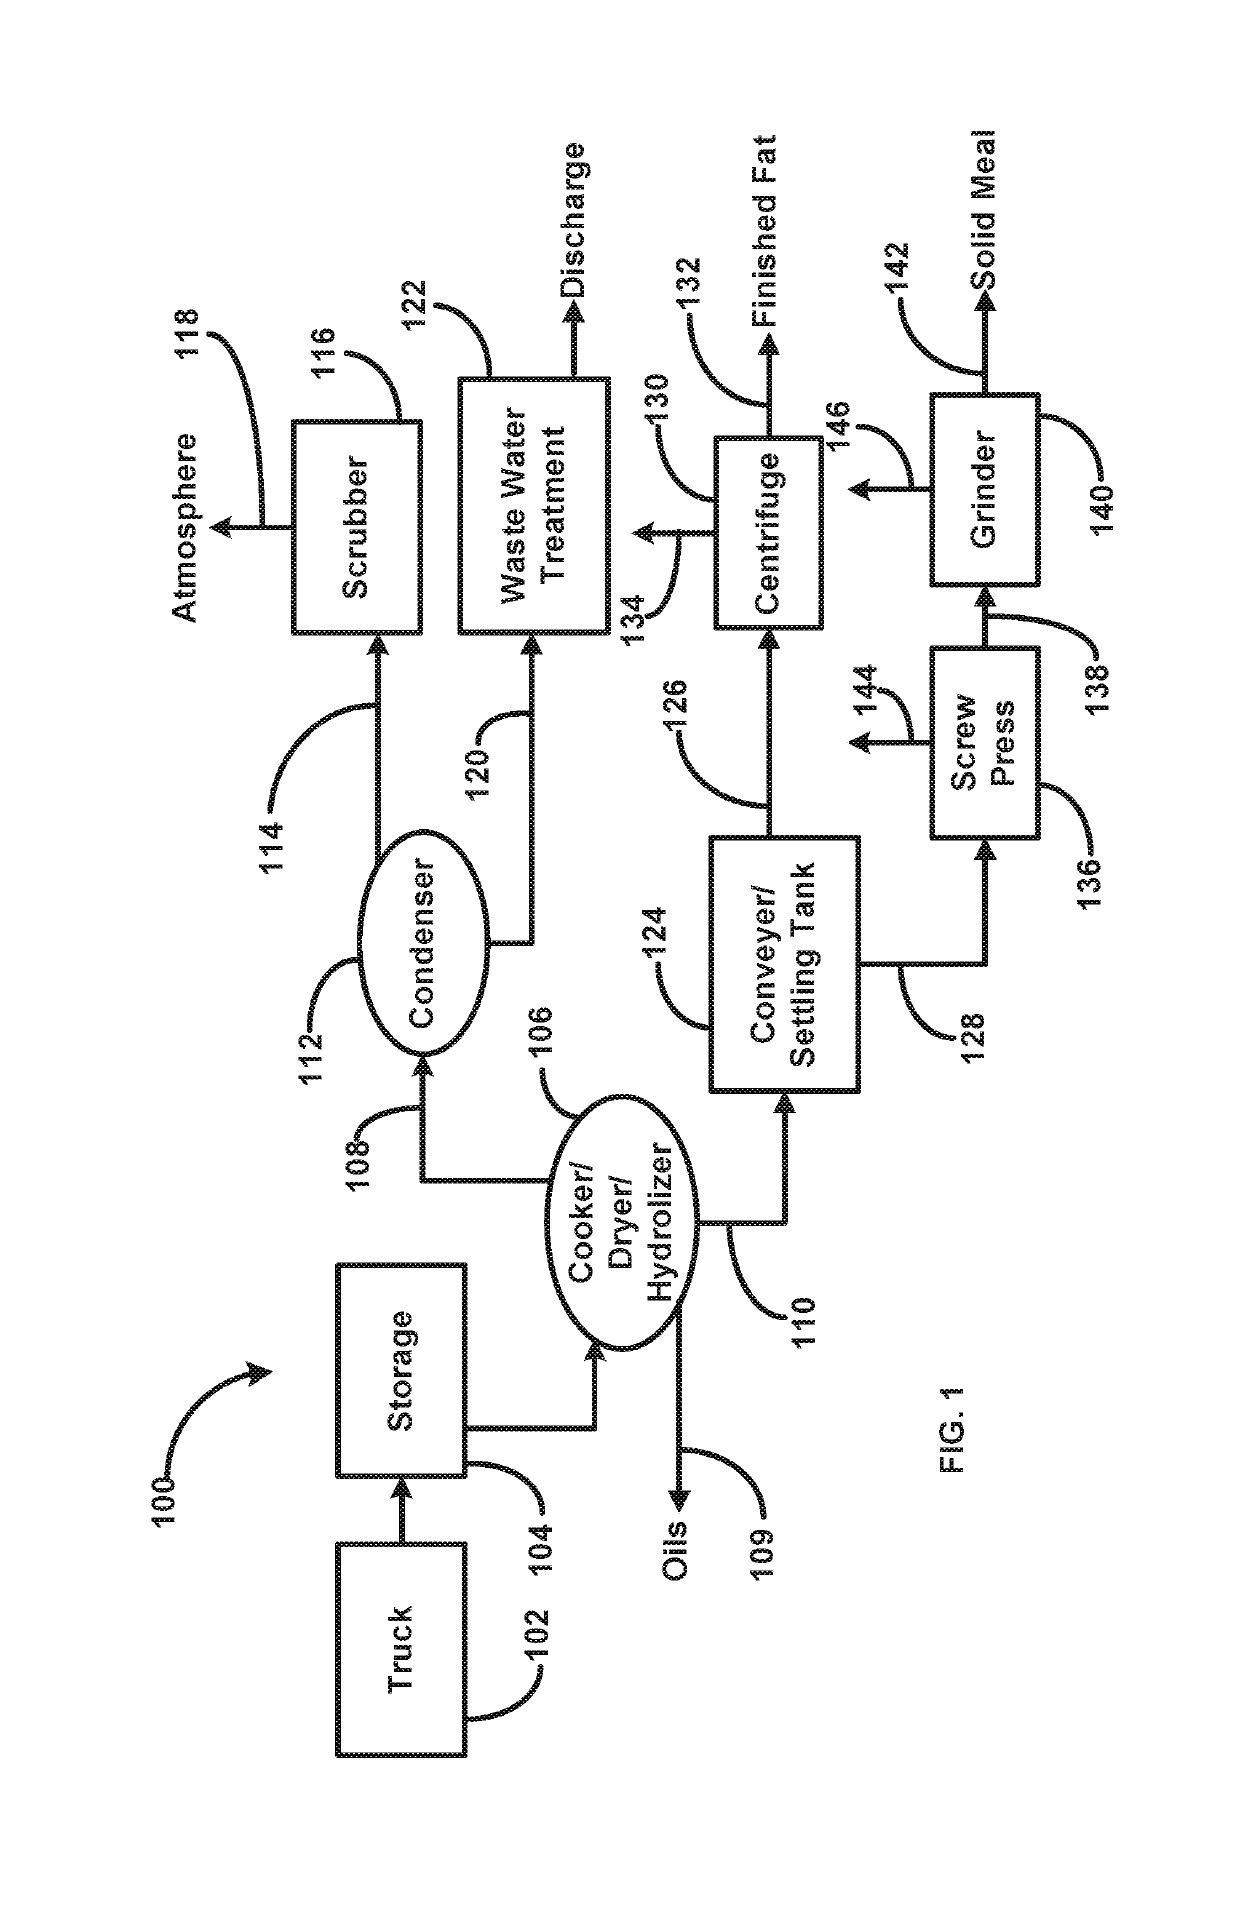 Methods and Equipment for Treatment of Odorous Gas Streams